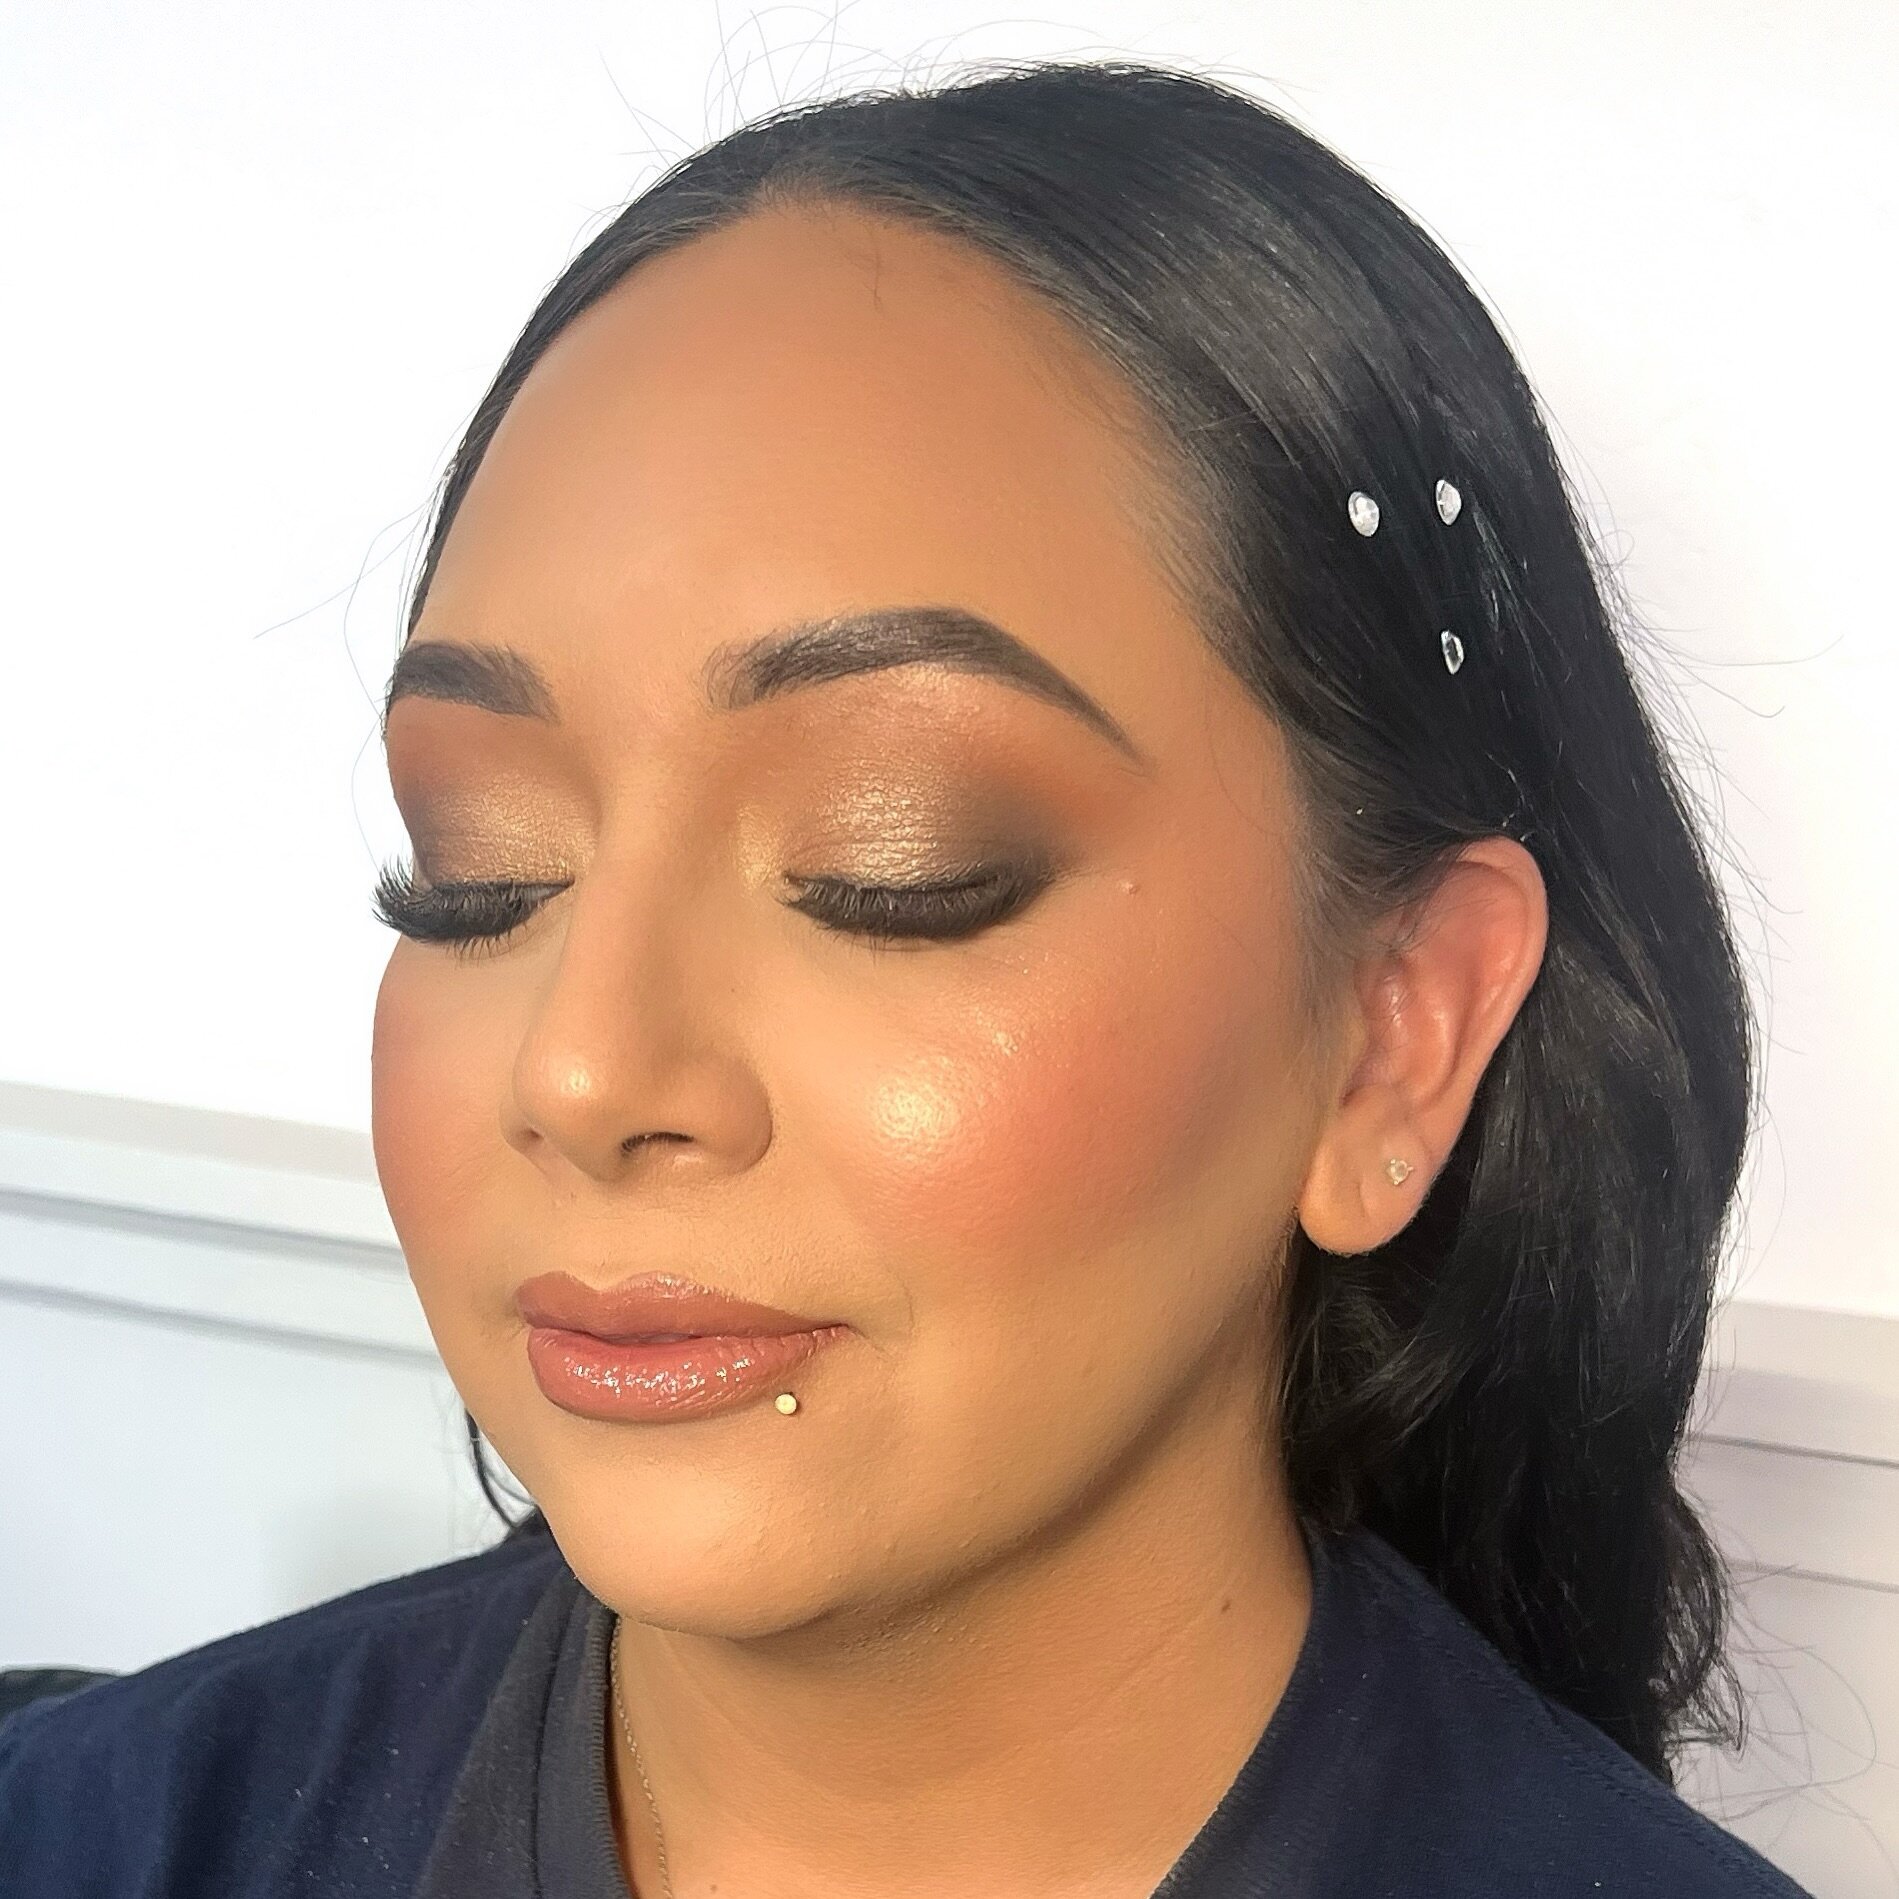 Makeup magic always in the making! Transforming faces for all your special occasions! Book your in studio glam session with the link in my bio or reach out to me for onsite services 💕

#specialoccasionmakeup #makeupartist #tucsonmakeupartist #glamma